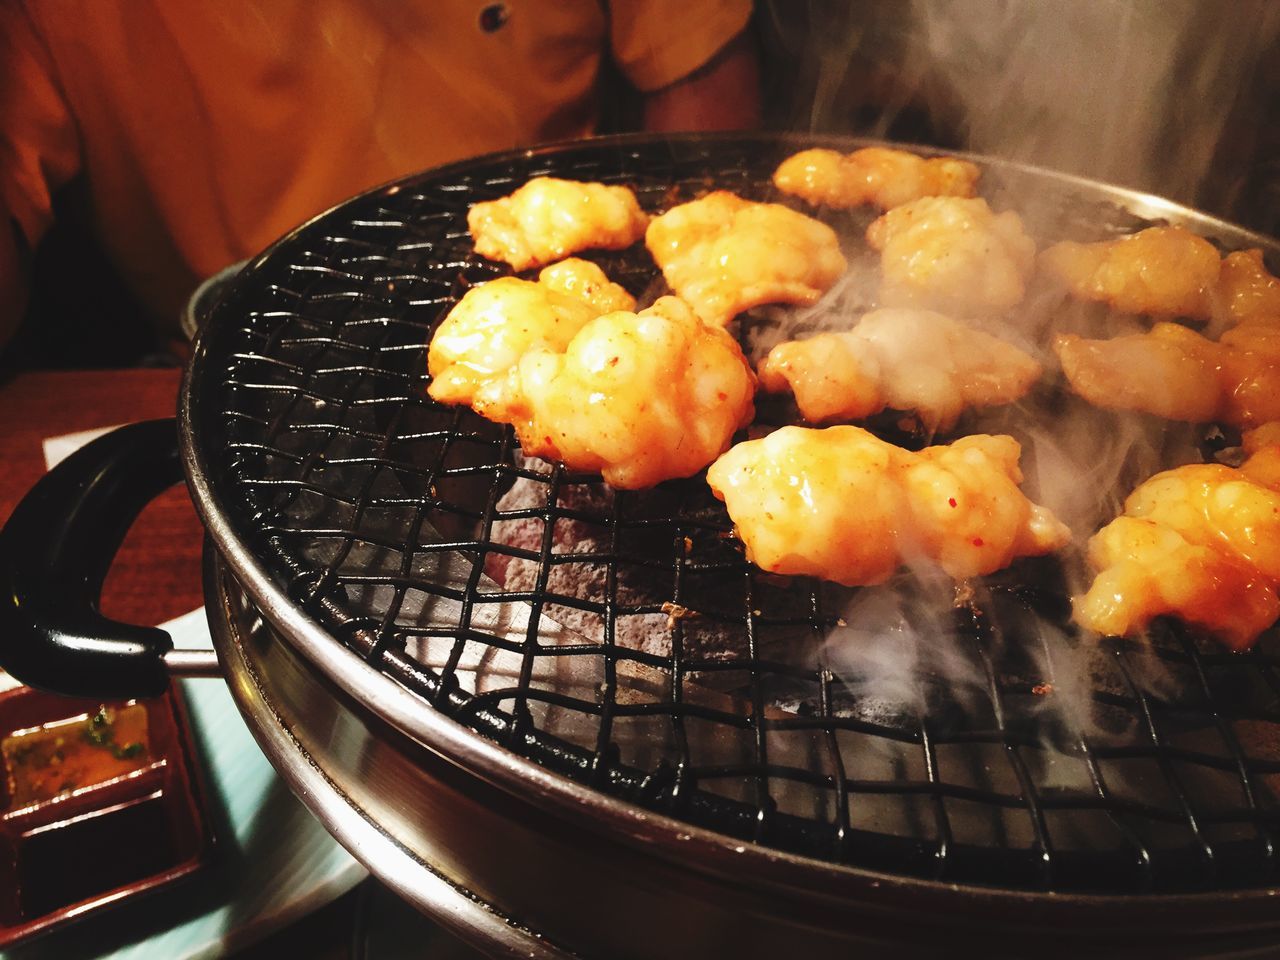 food and drink, food, indoors, freshness, cooking, healthy eating, preparation, preparing food, heat - temperature, still life, close-up, barbecue grill, cooking pan, frying pan, barbecue, meat, bowl, meal, orange color, ready-to-eat